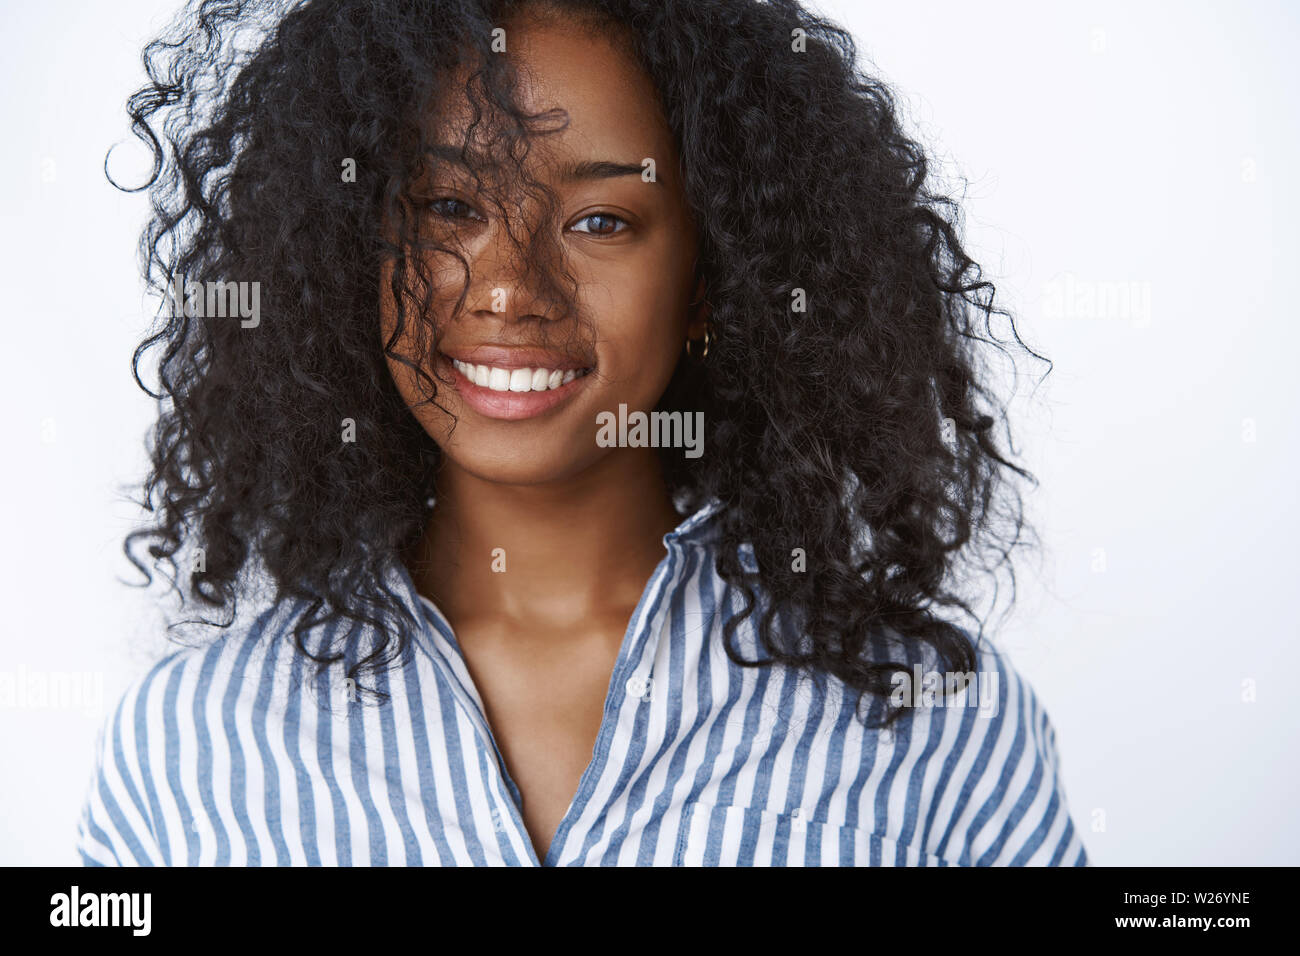 Close-up positive carefree happy good-looking smiling african-american fashioable woman playing curly afro haircut grinning happily expressing positiv Stock Photo